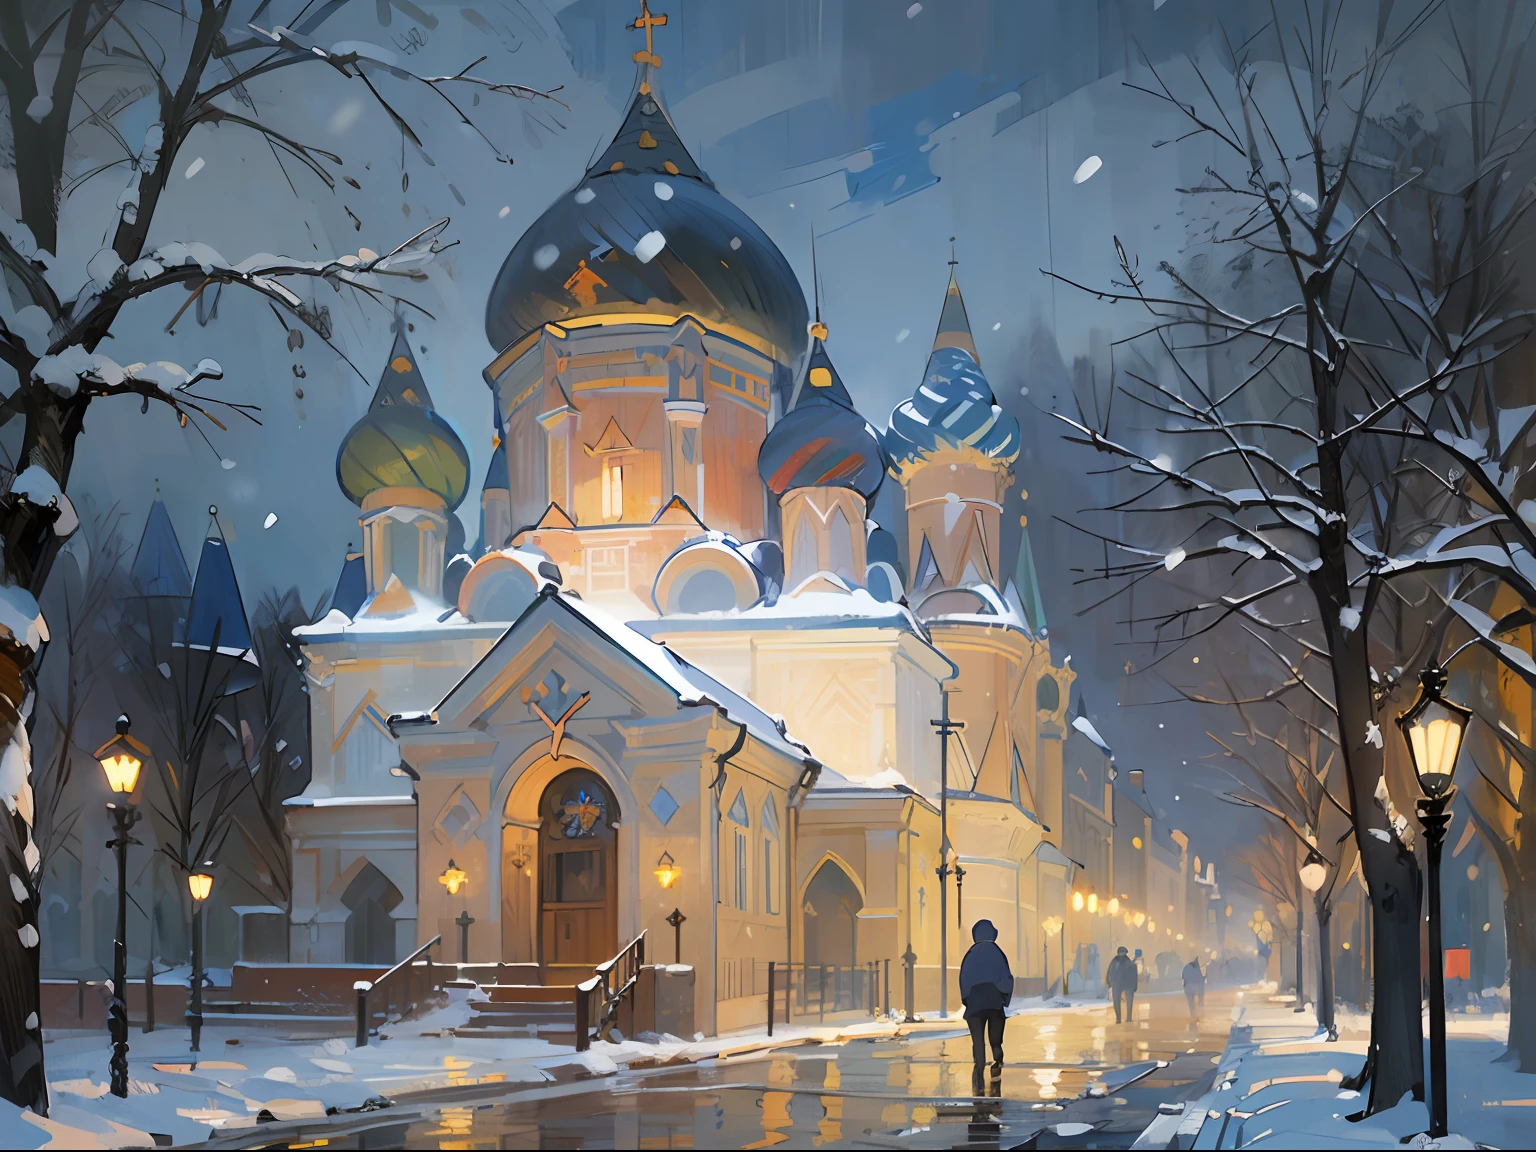 (((chapel))), (((church))), ((domes)), ((night time)), darkness, Evening, Lights, (((Russia))), ((19th century)), snowing, winter, (Renoir), (many), (oil painting), (Sketch)